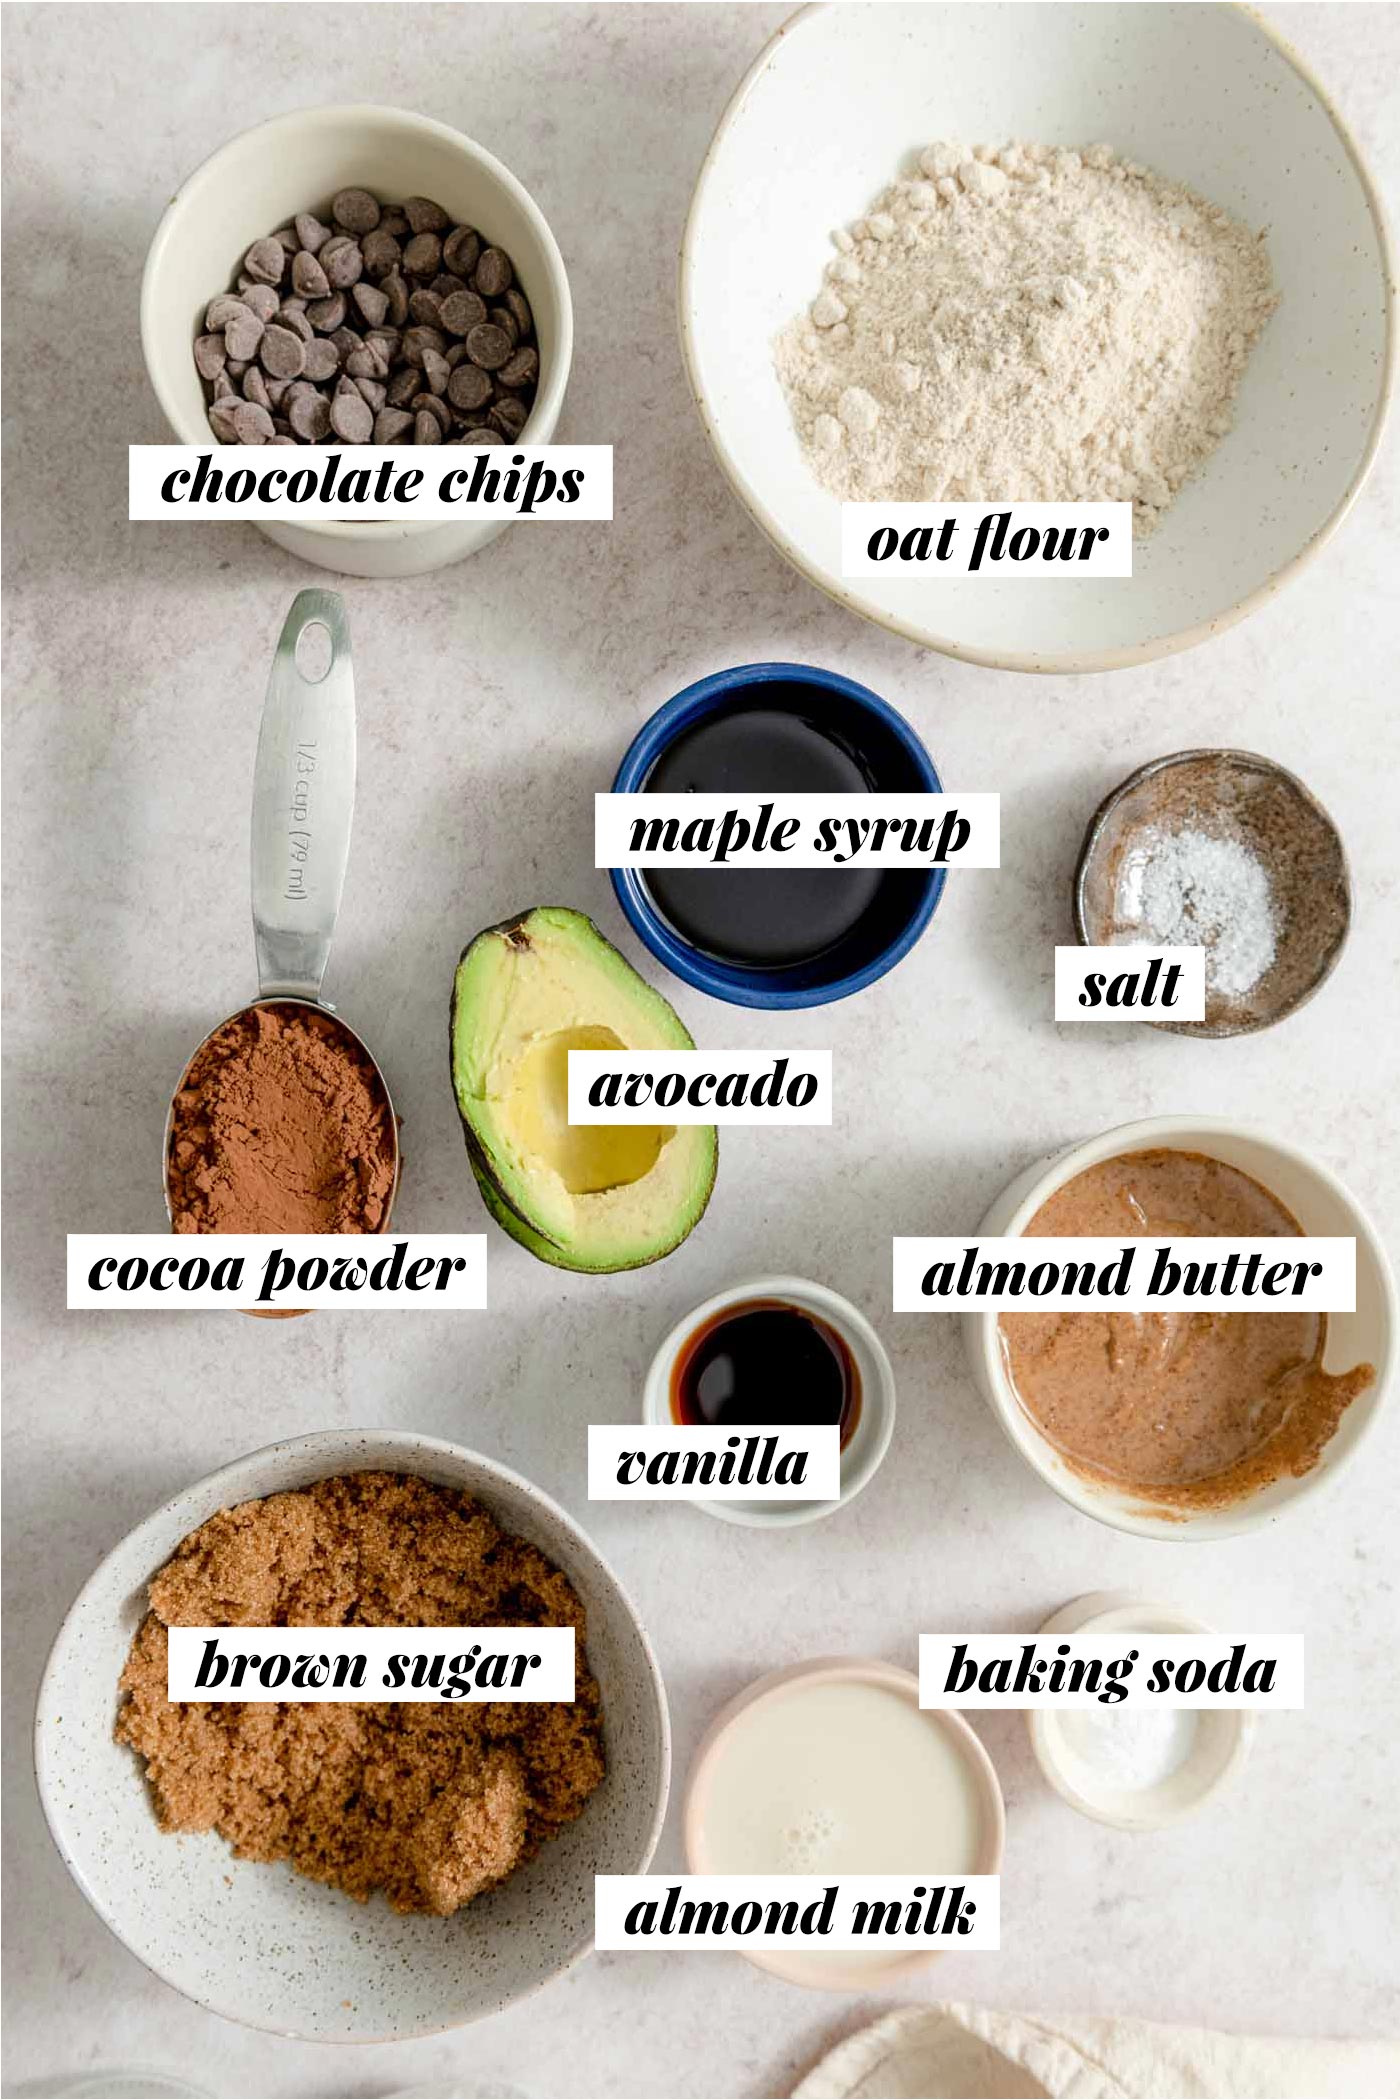 All the ingredients needed to make a vegan avocado brownie recipe with oat flour, brown sugar, maple syrup and chocolate chips.